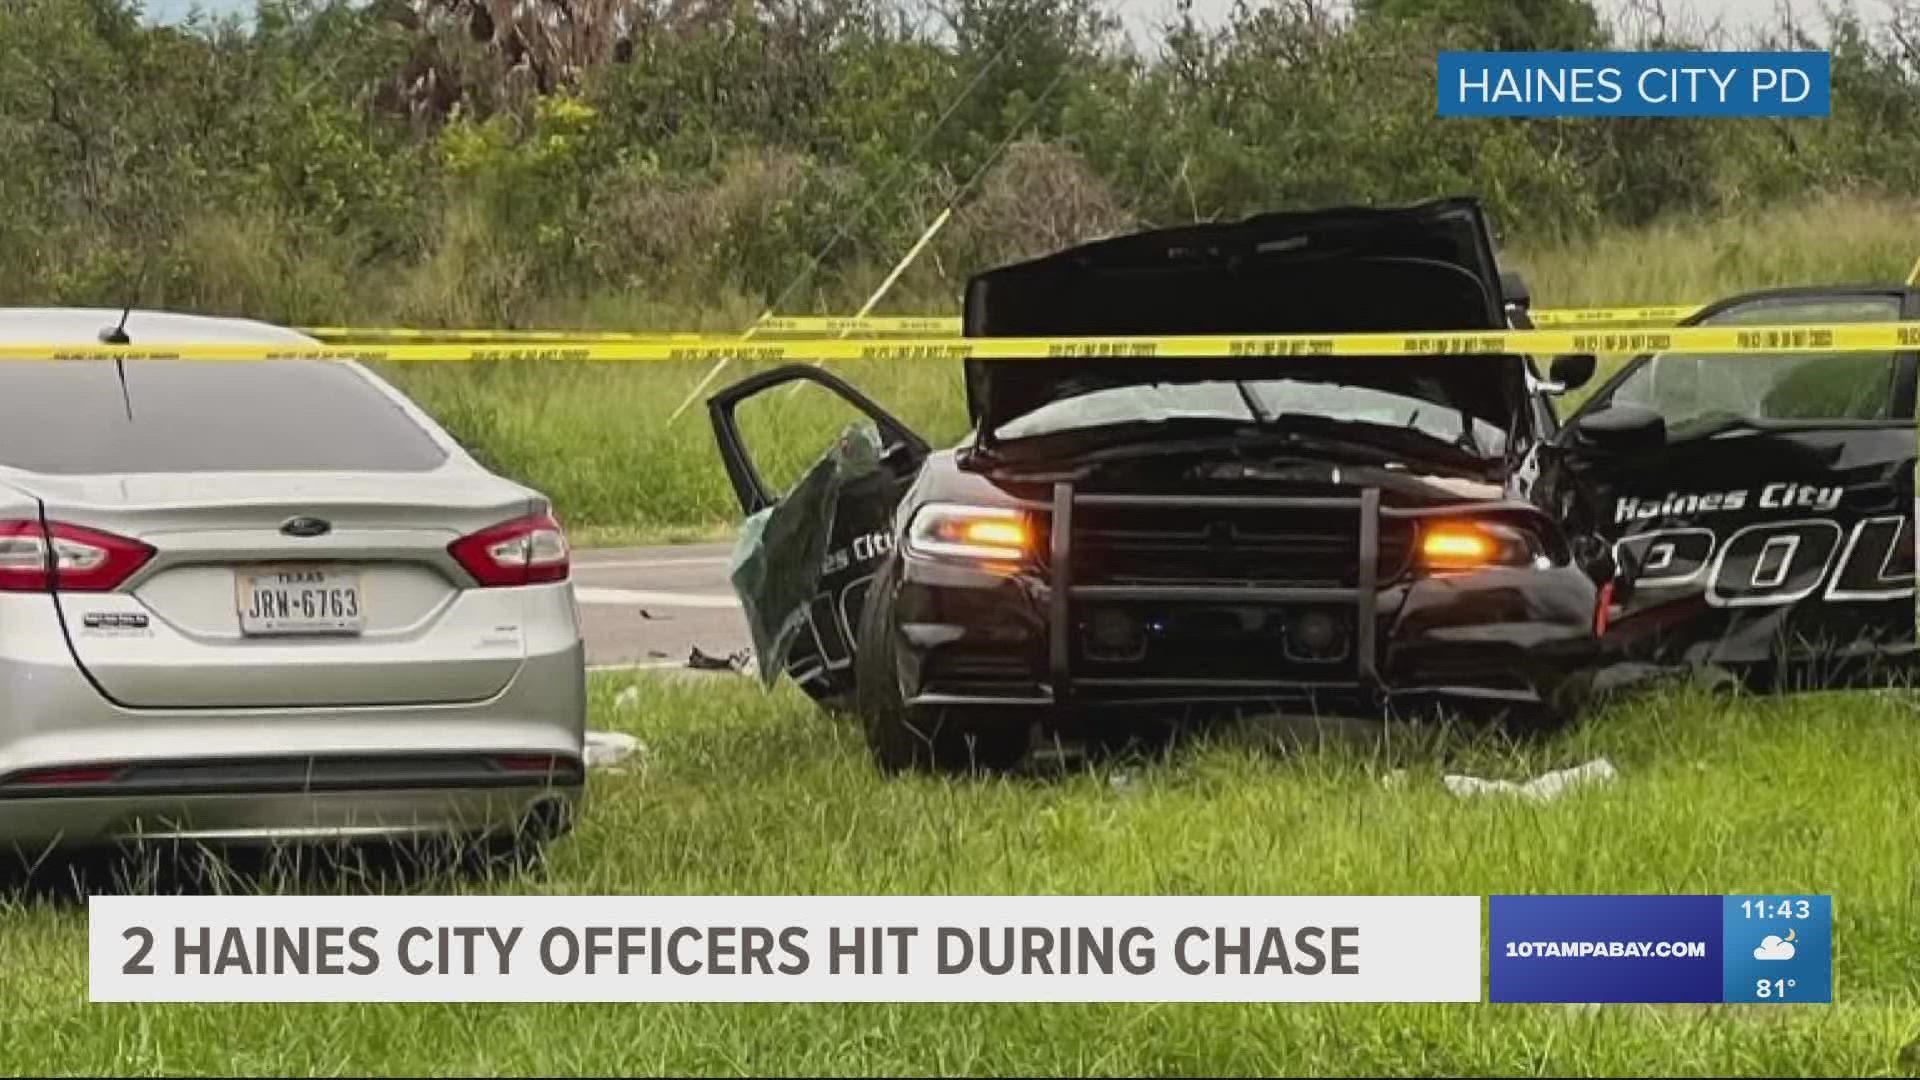 The incident at the traffic stop reportedly led to a car crash that injured two Haines City police officers.